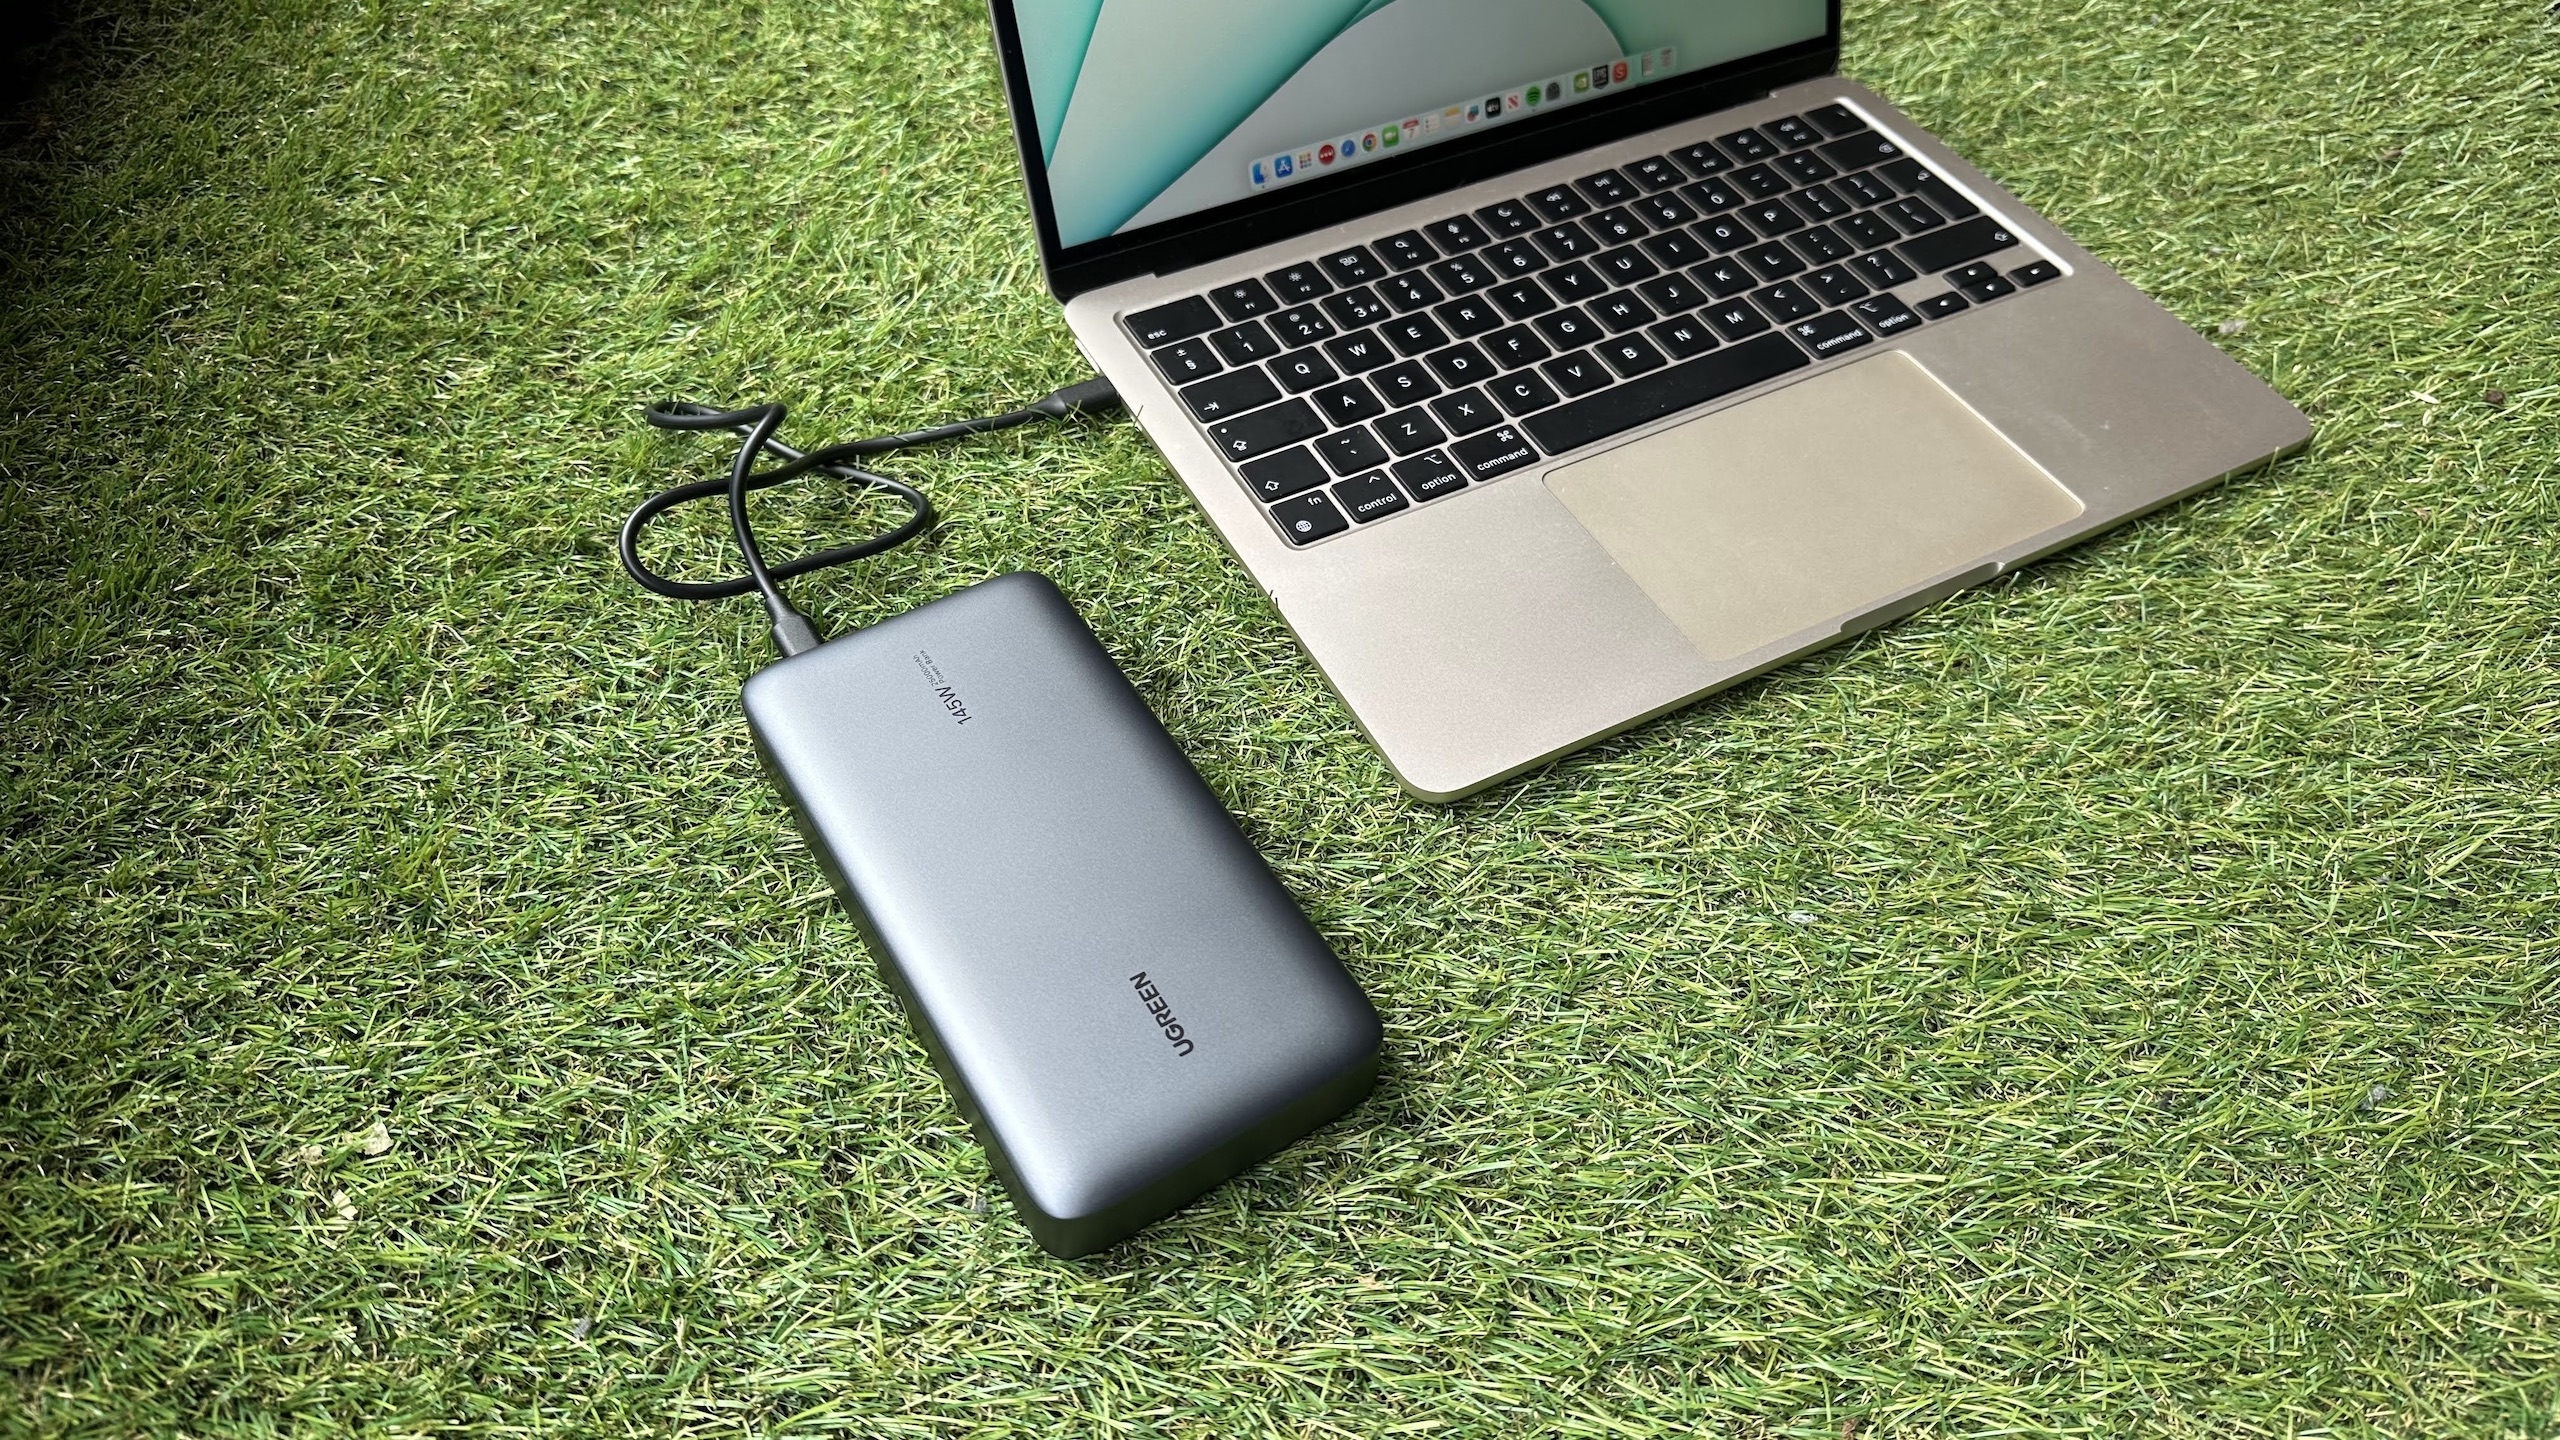 Anker Prime 200W 20,000mAh Power Bank Review - Fourth Source